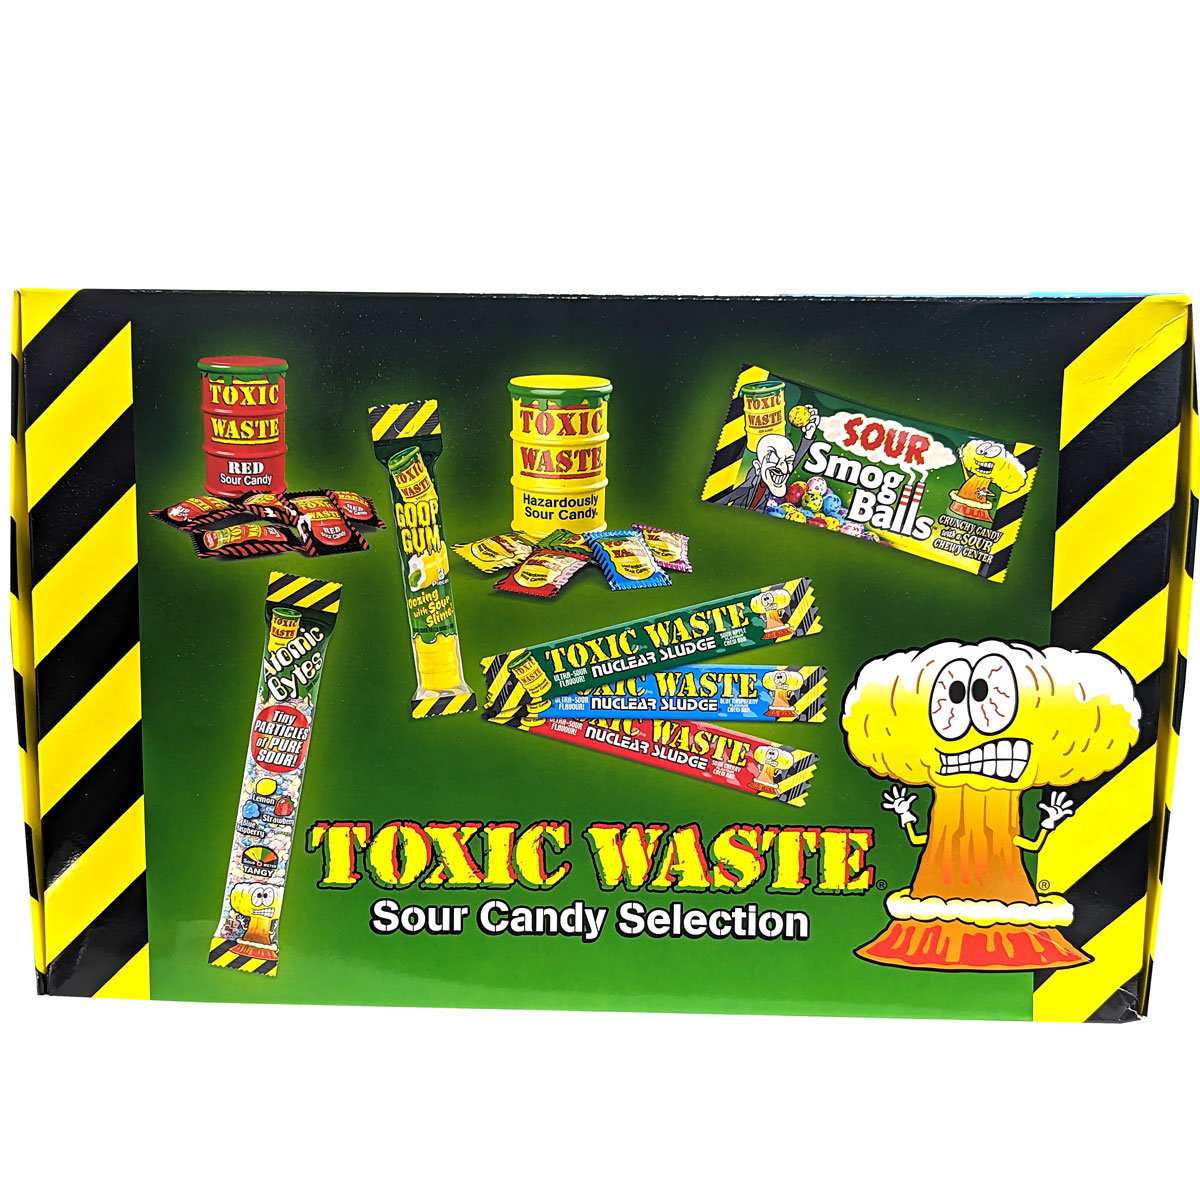 Toxic Waste Sour Candy Selection Box (Large)